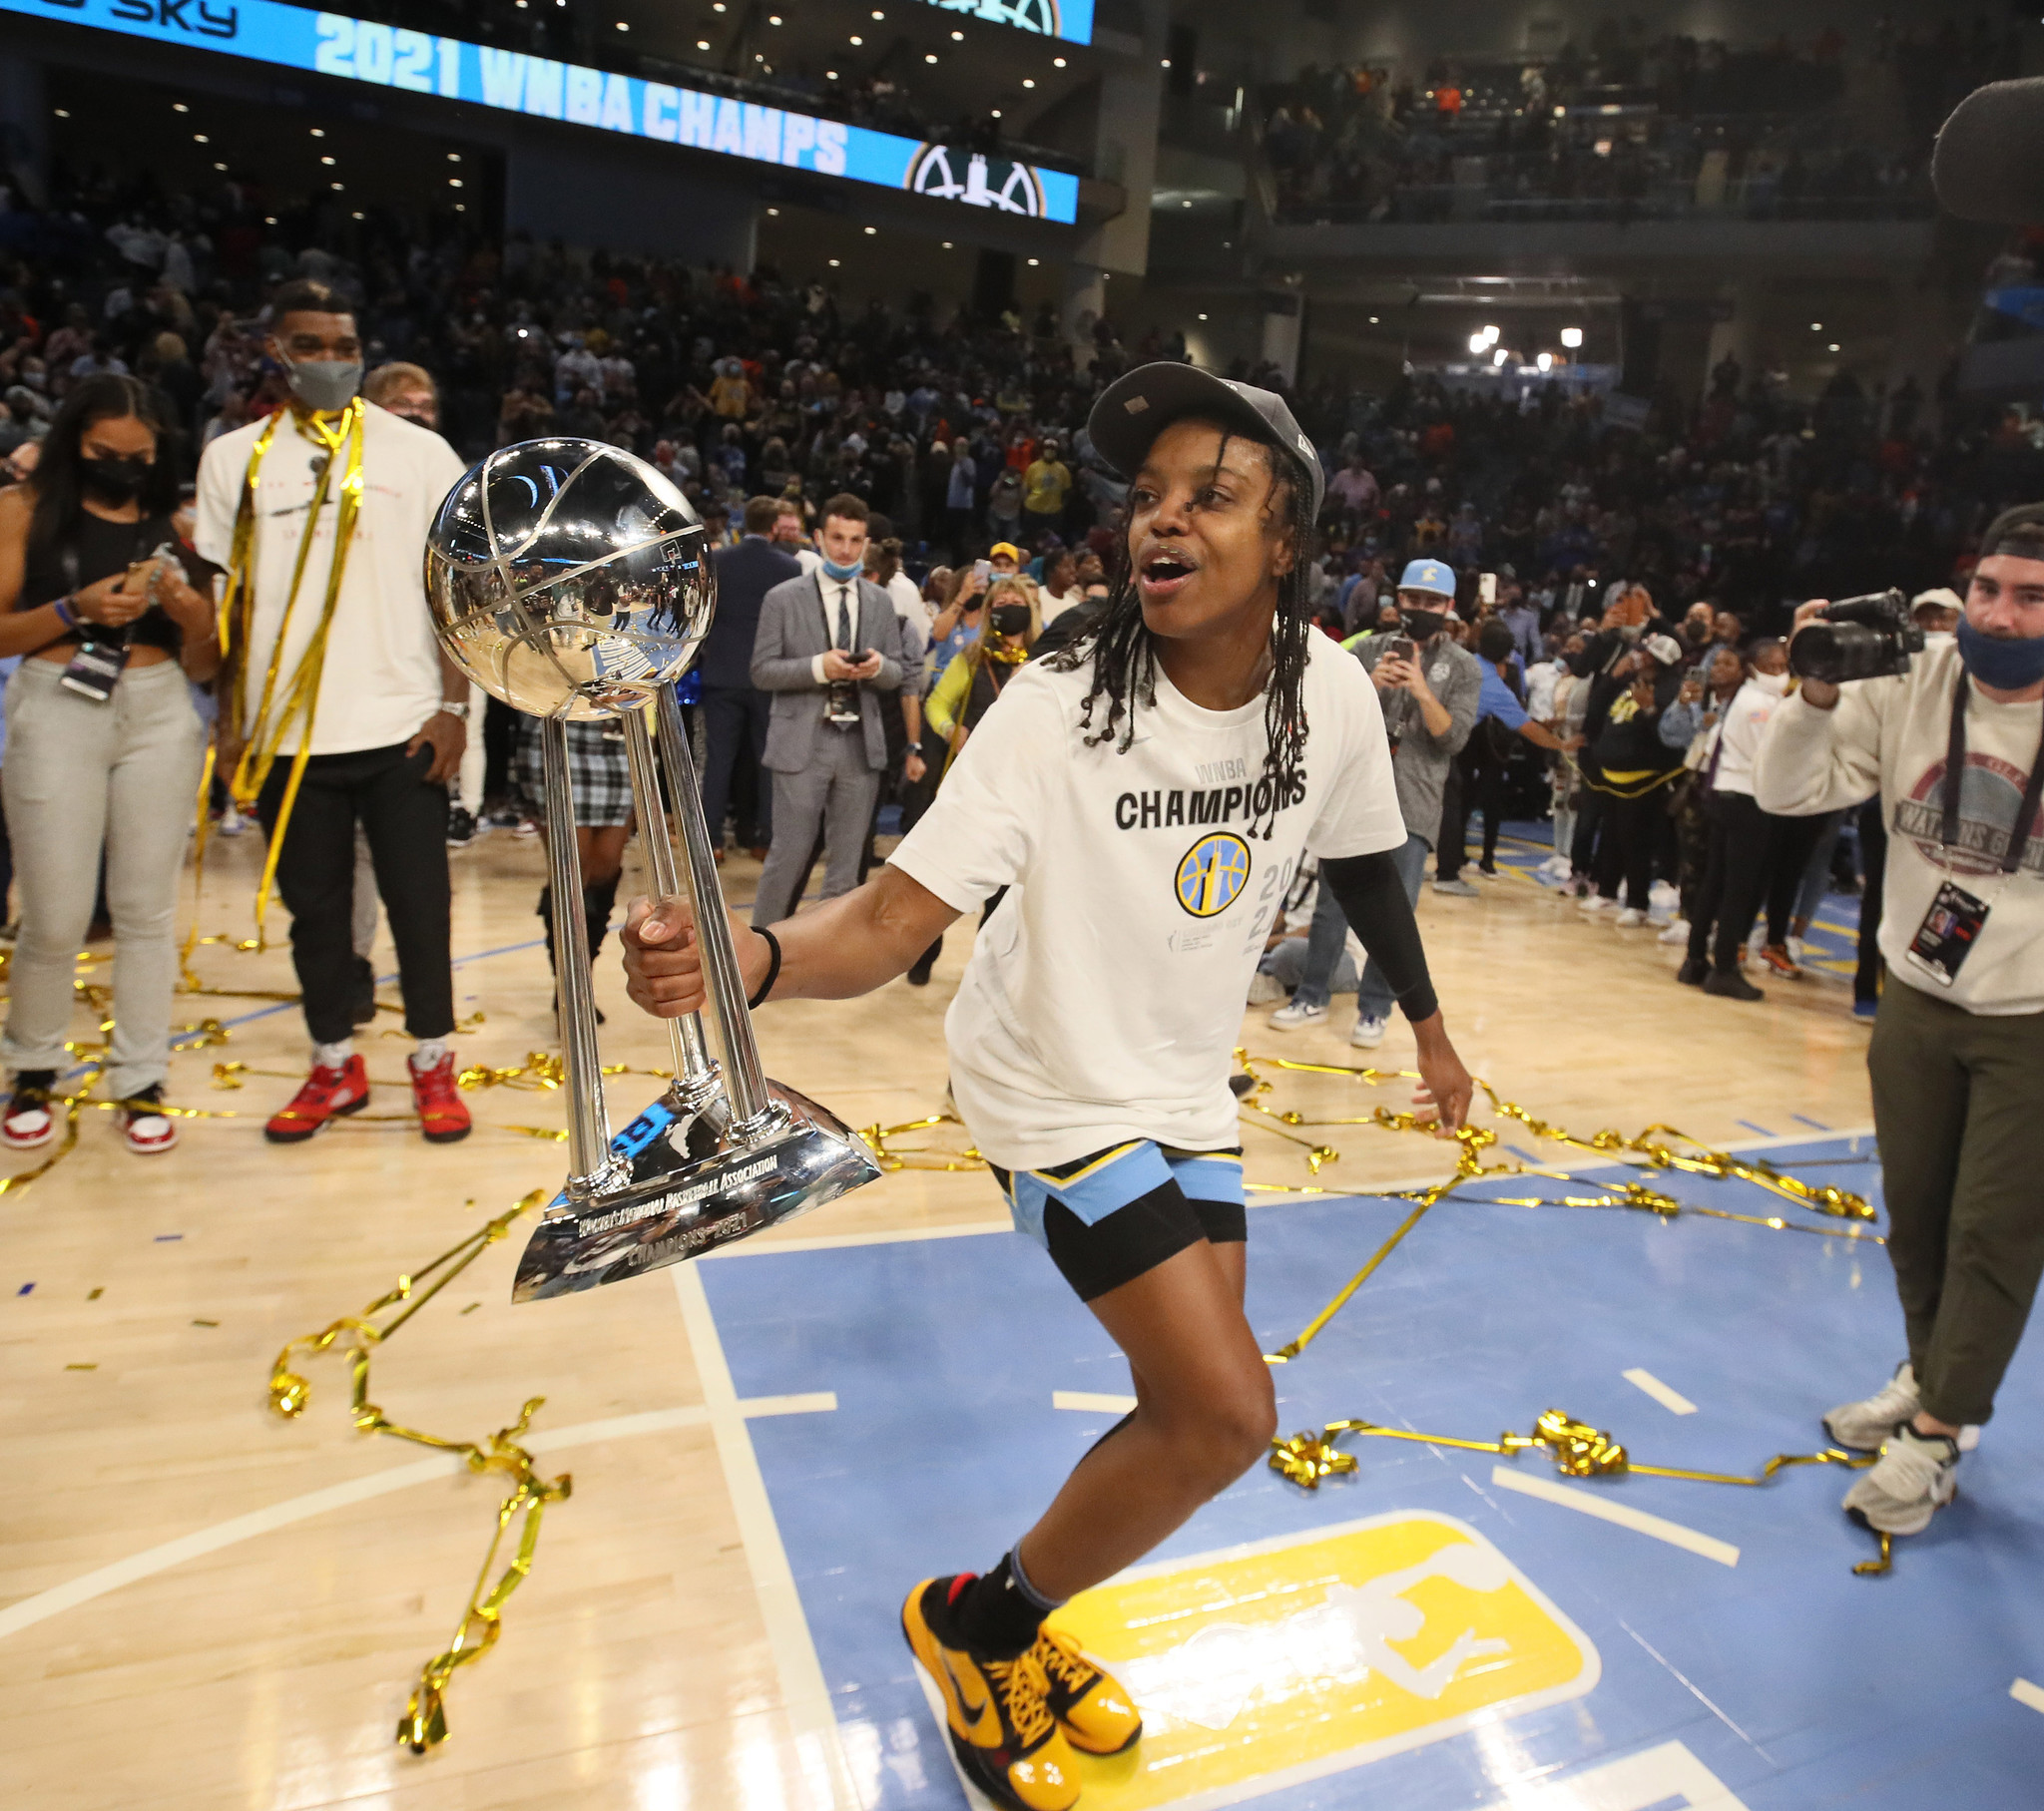 WNBA on X: 🏆 CHAMPIONS 🏆 For the first time in franchise history, the @ chicagosky are #WNBA champs! #WNBAFinals presented by @TV   / X